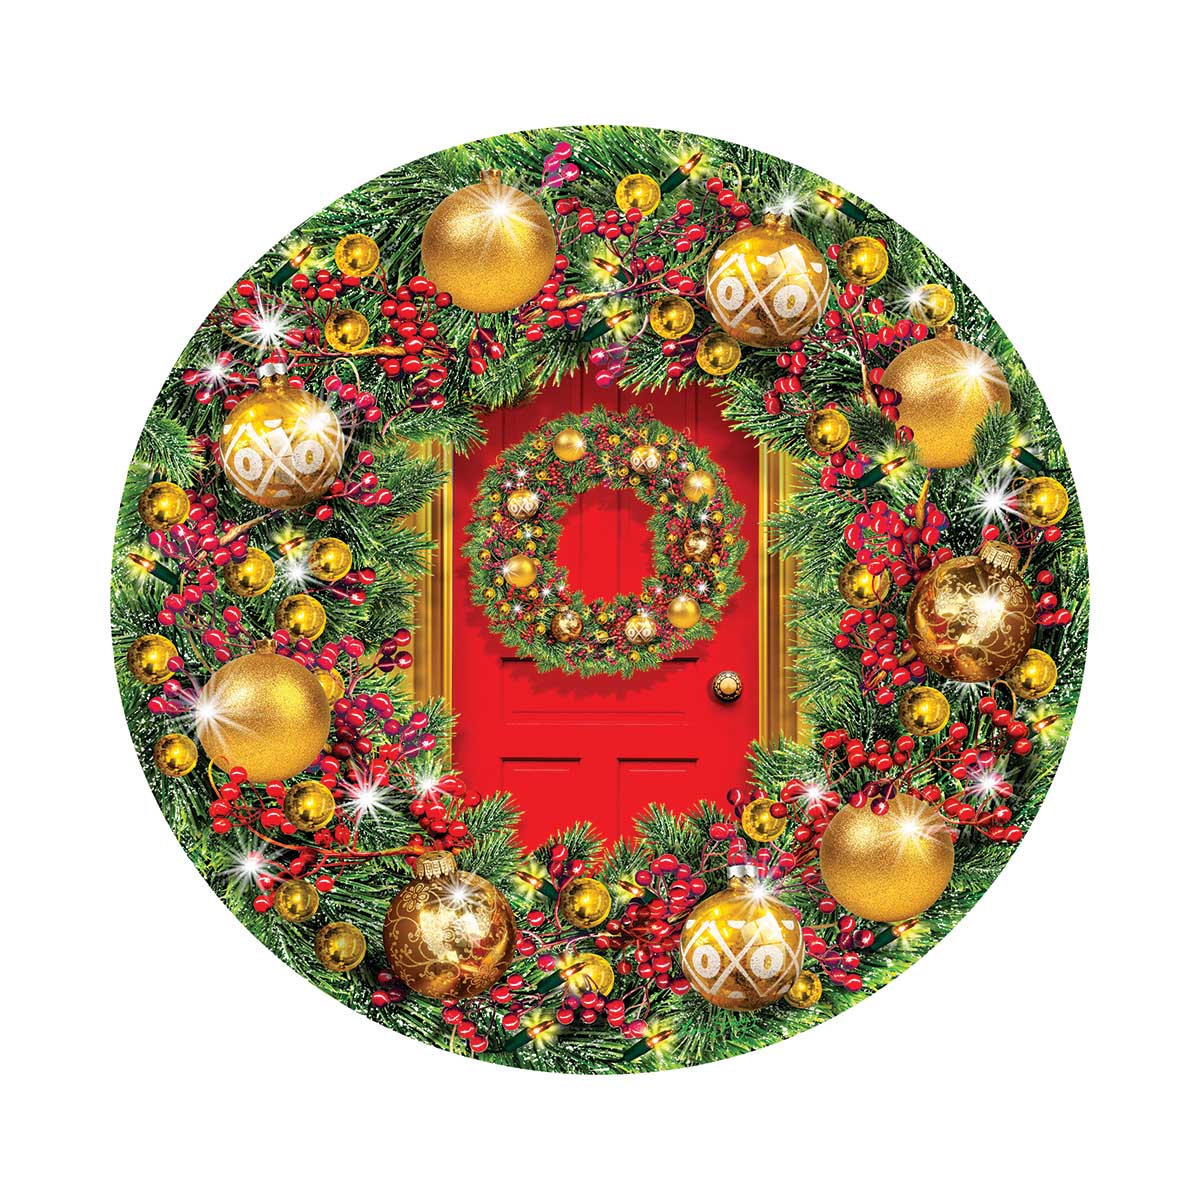 Green and Gold Wreath Christmas Jigsaw Puzzle